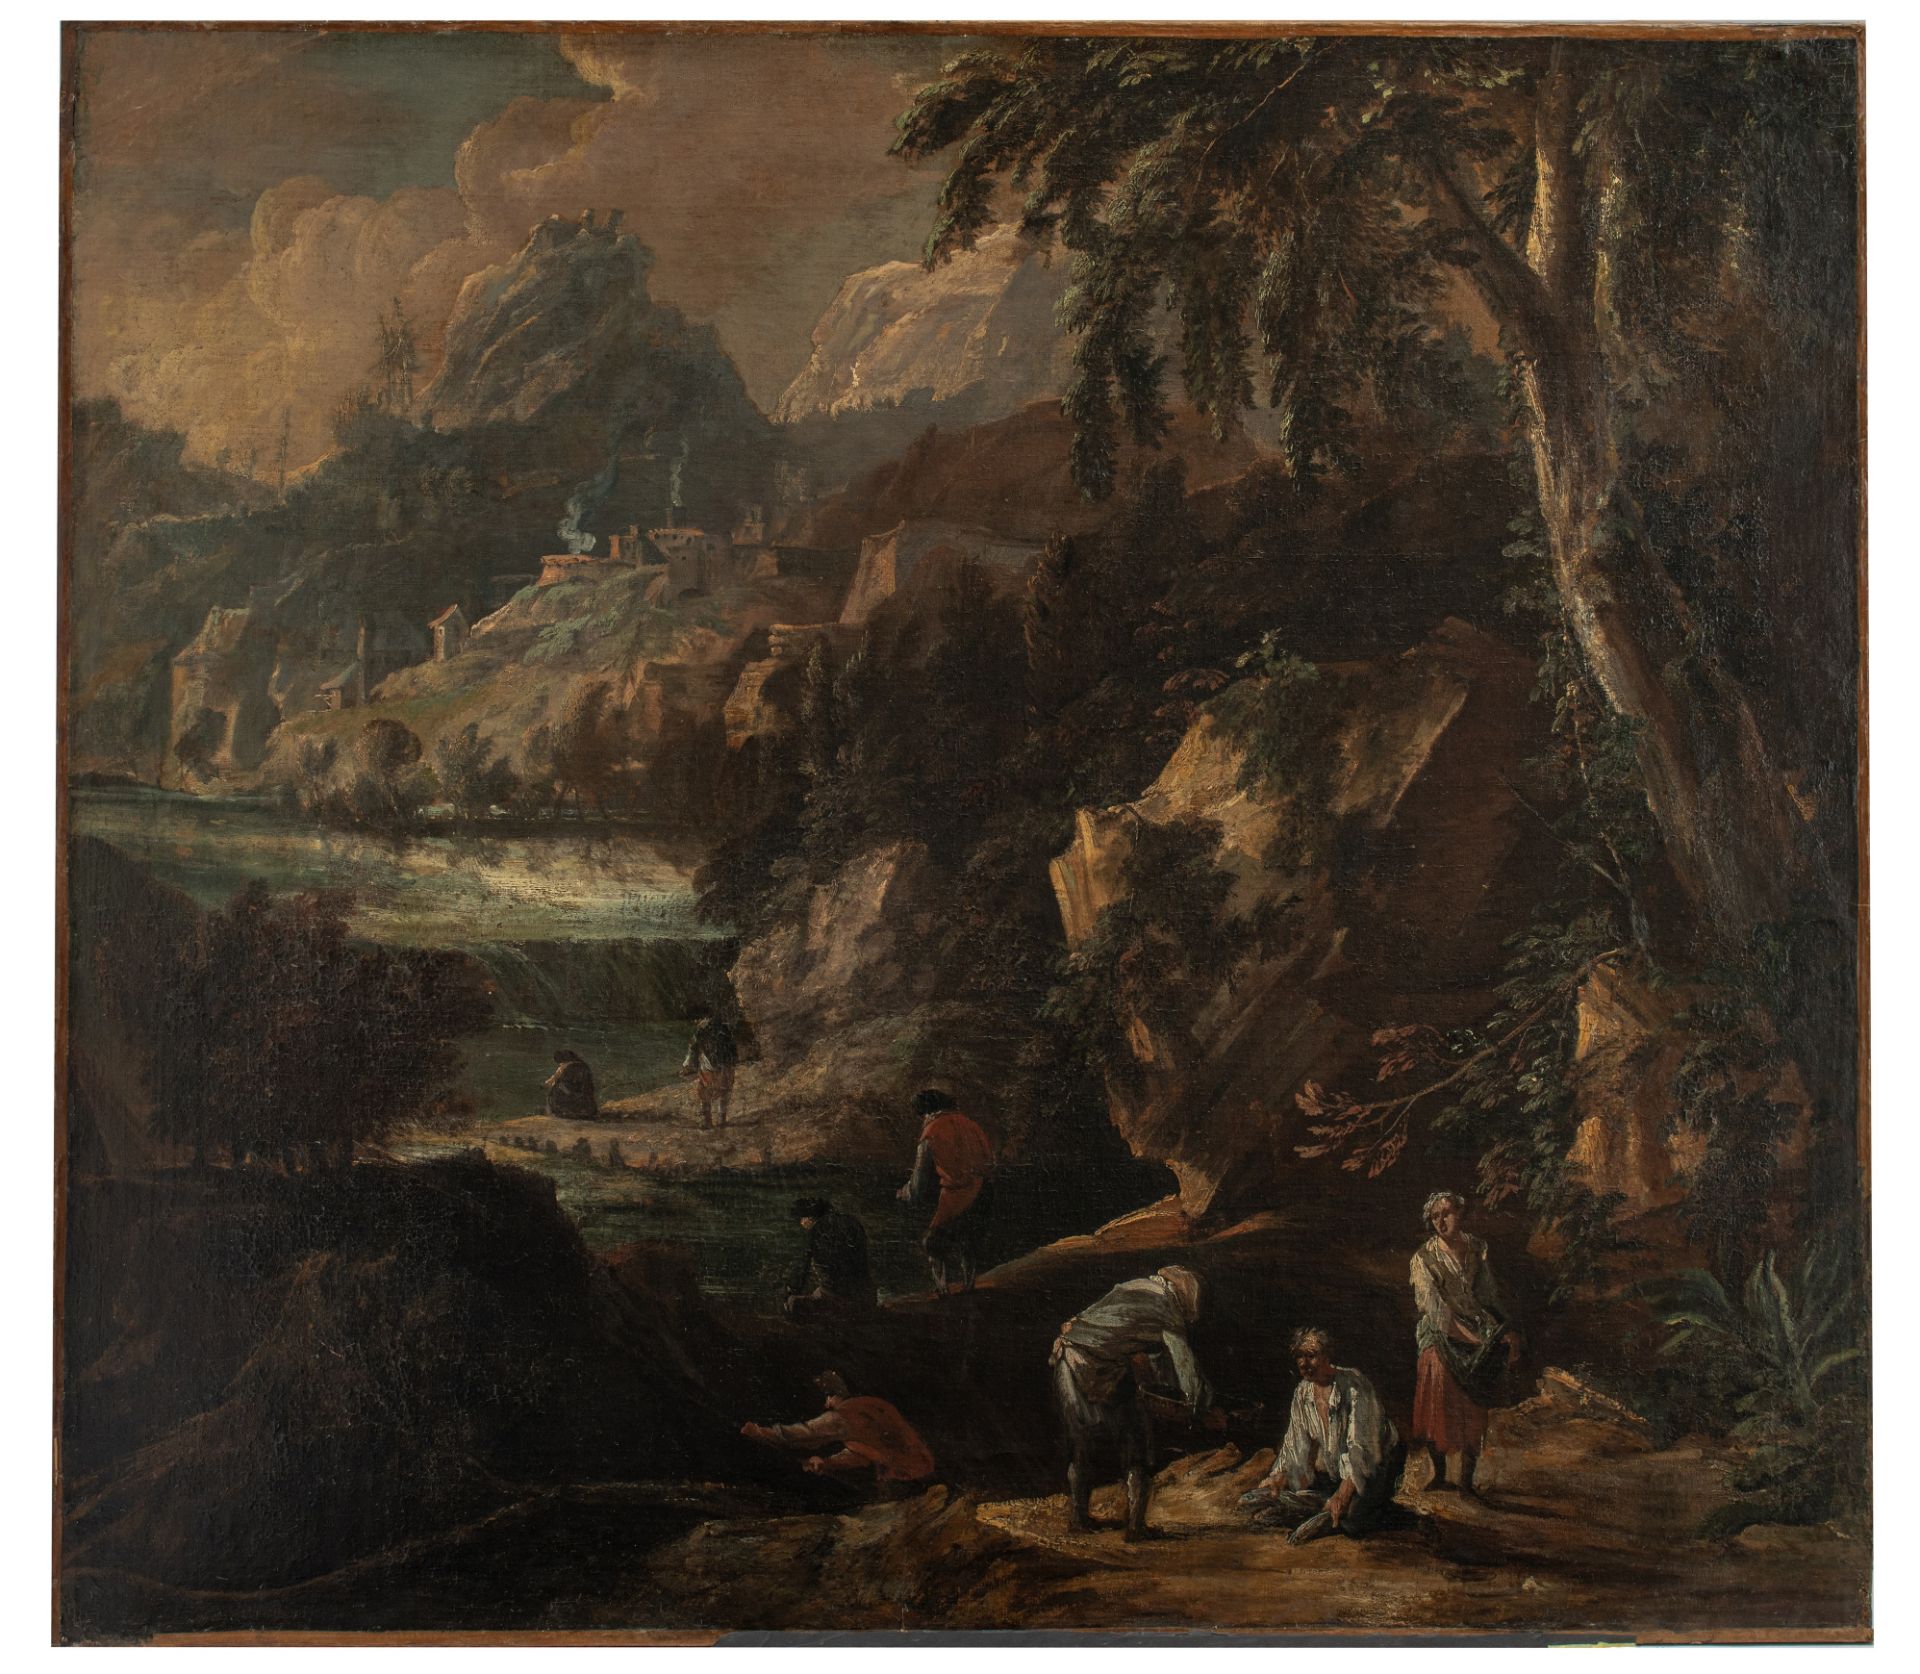 Attributed to Salvator Rosa (1615-1673), the golddiggers, oil on canvas, 120 x 140 cm - Bild 2 aus 8